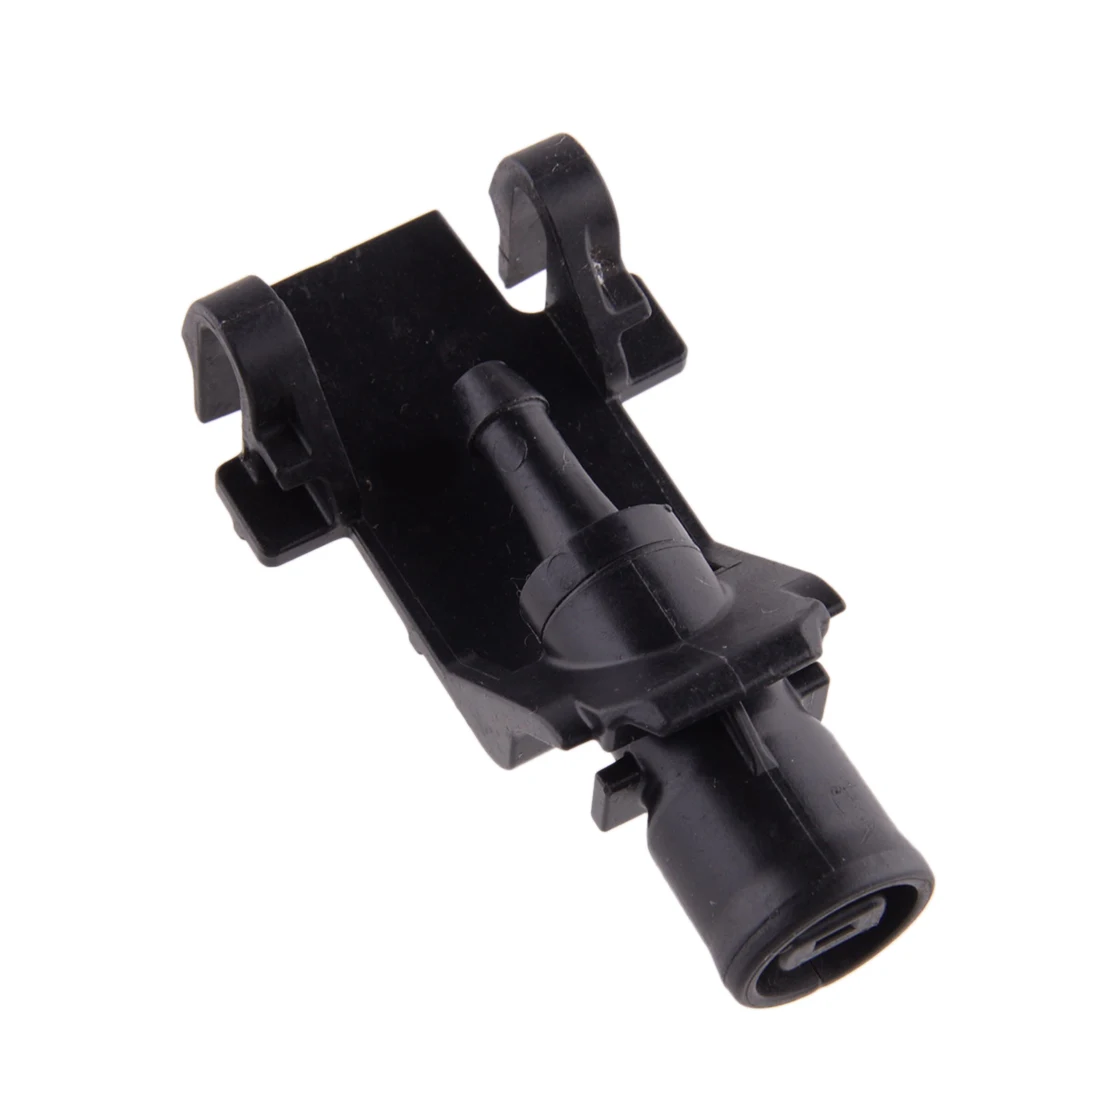 

76810-TK4-A11 Black Car Front Windshield Wiper Washer Nozzle Fit for Acura MDX TL Plastic